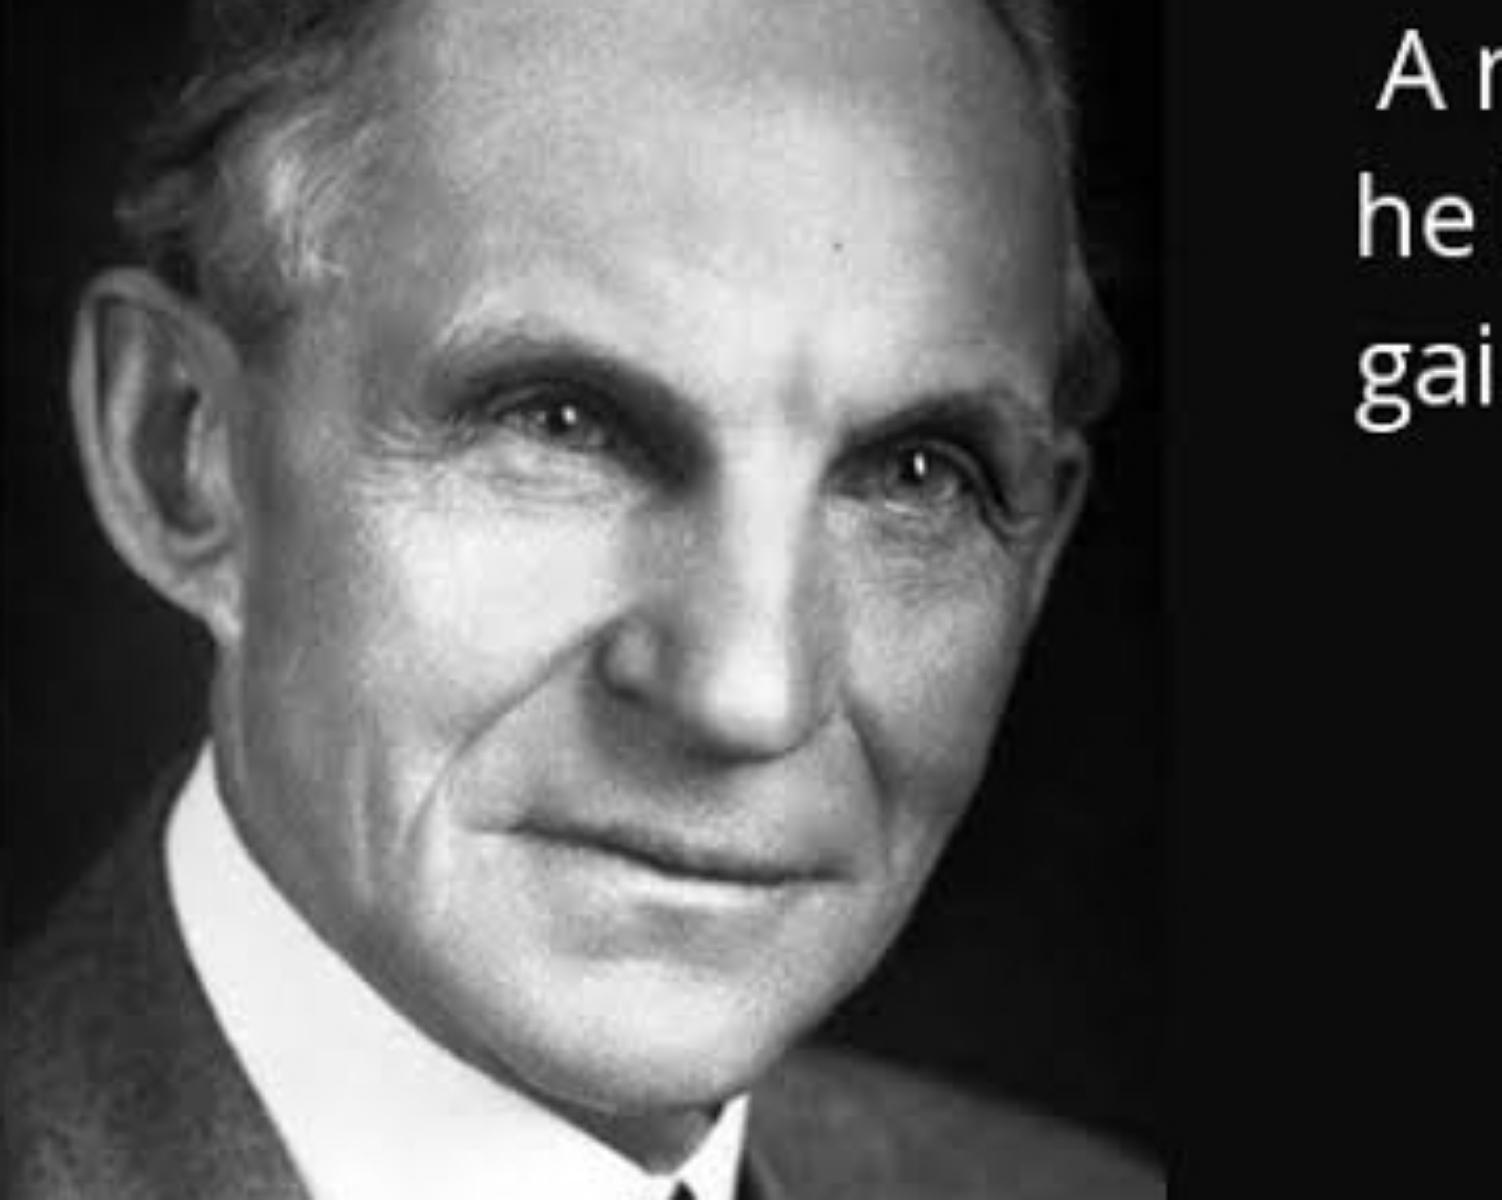 HENRY FORD